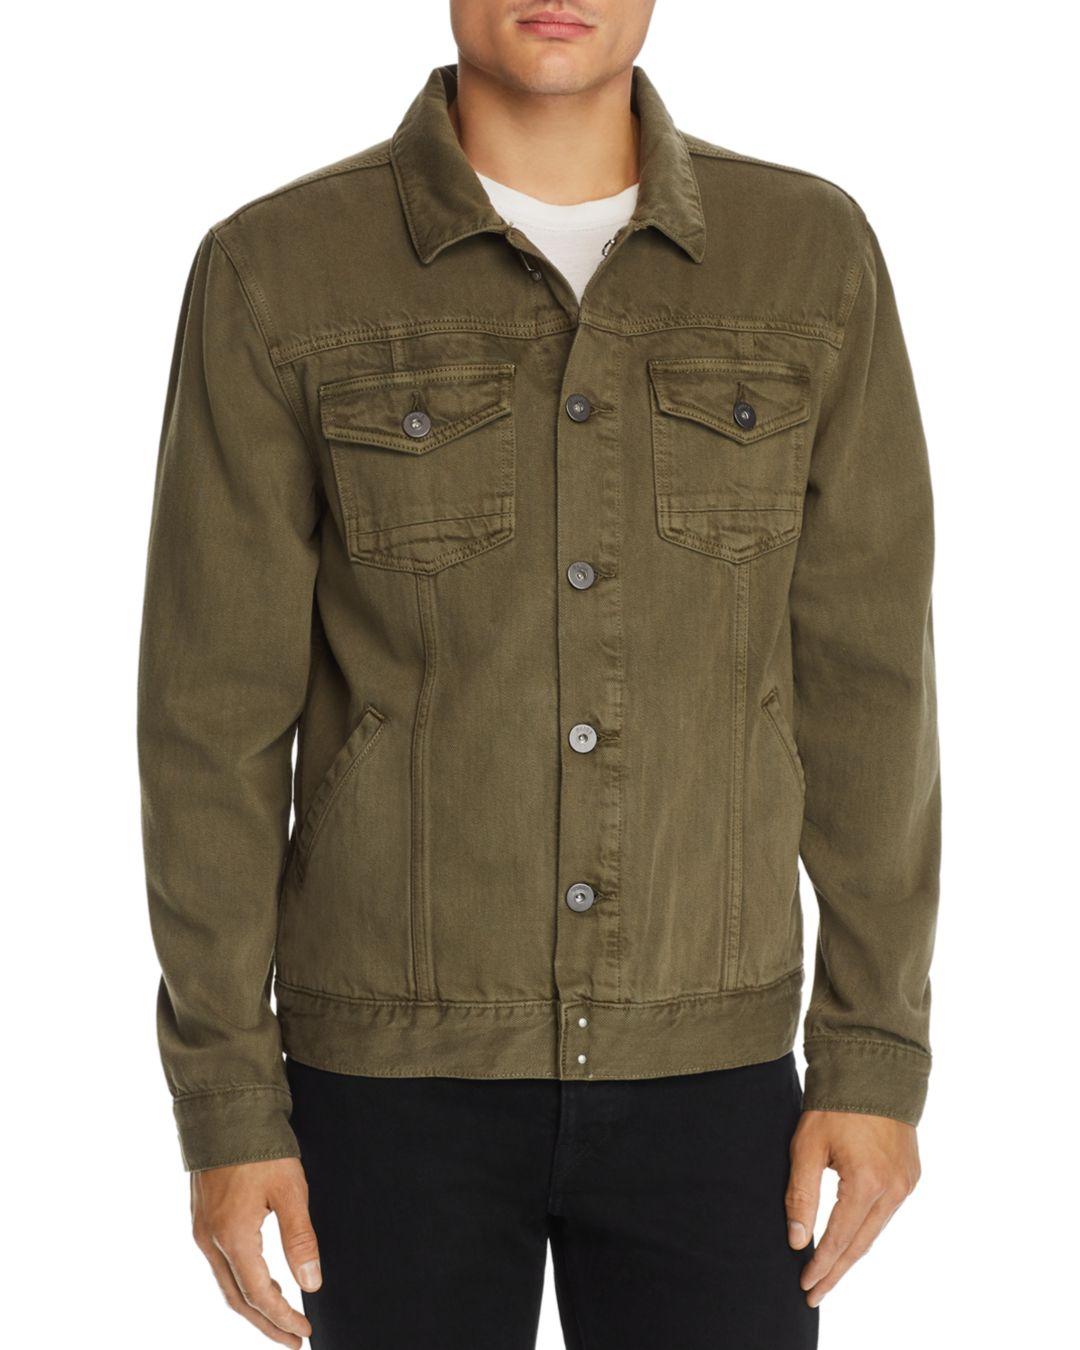 PAIGE Cotton Scout Jacket in Green for Men - Lyst